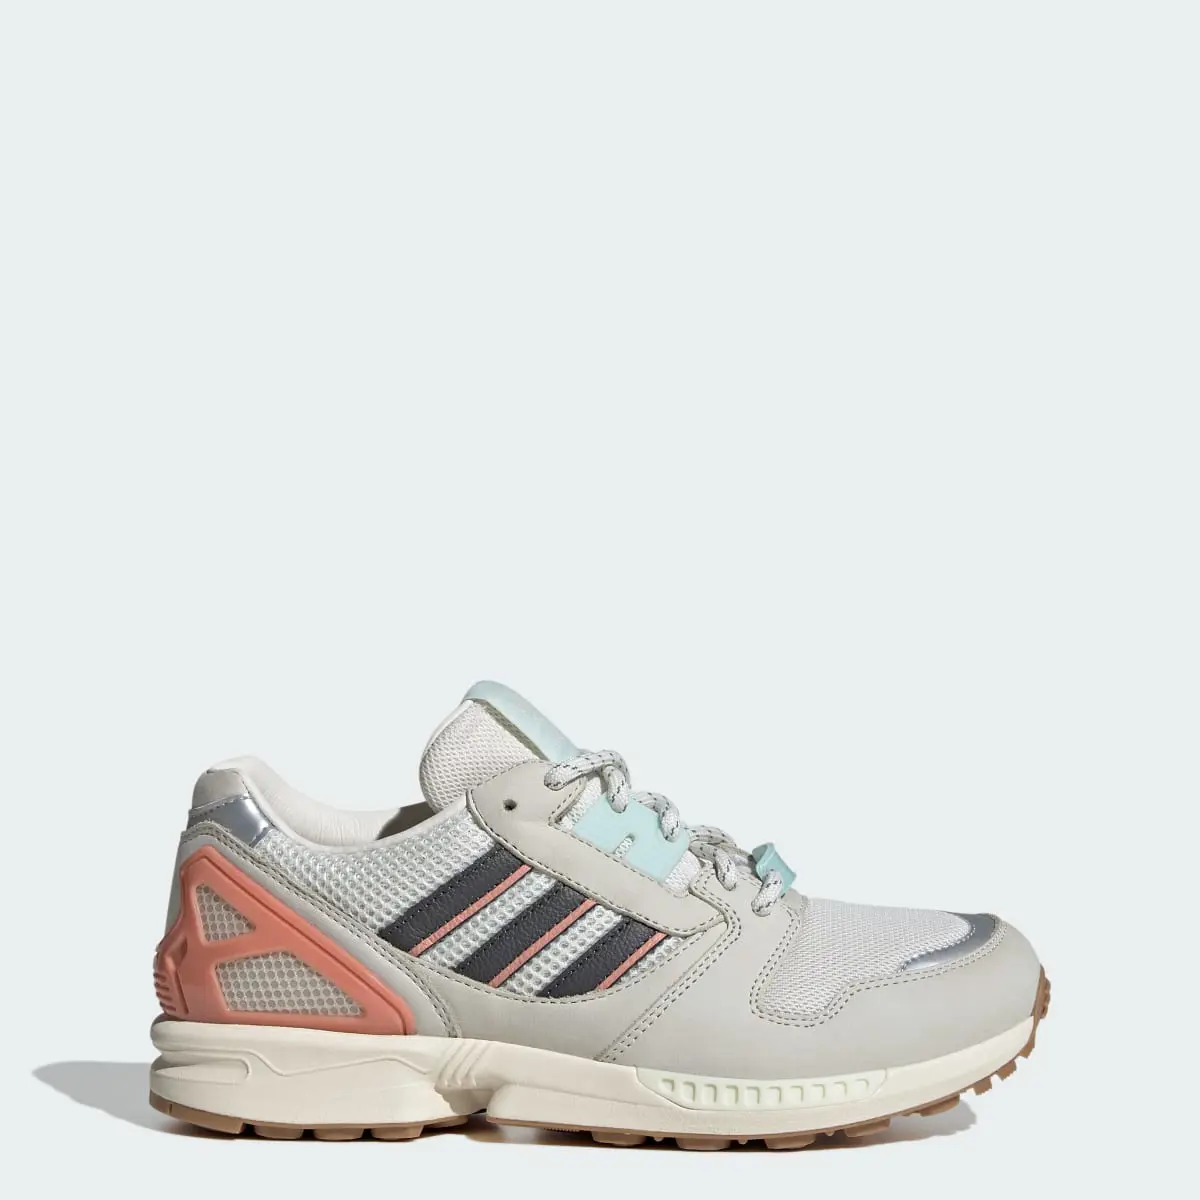 Adidas ZX 8000 Shoes. 1